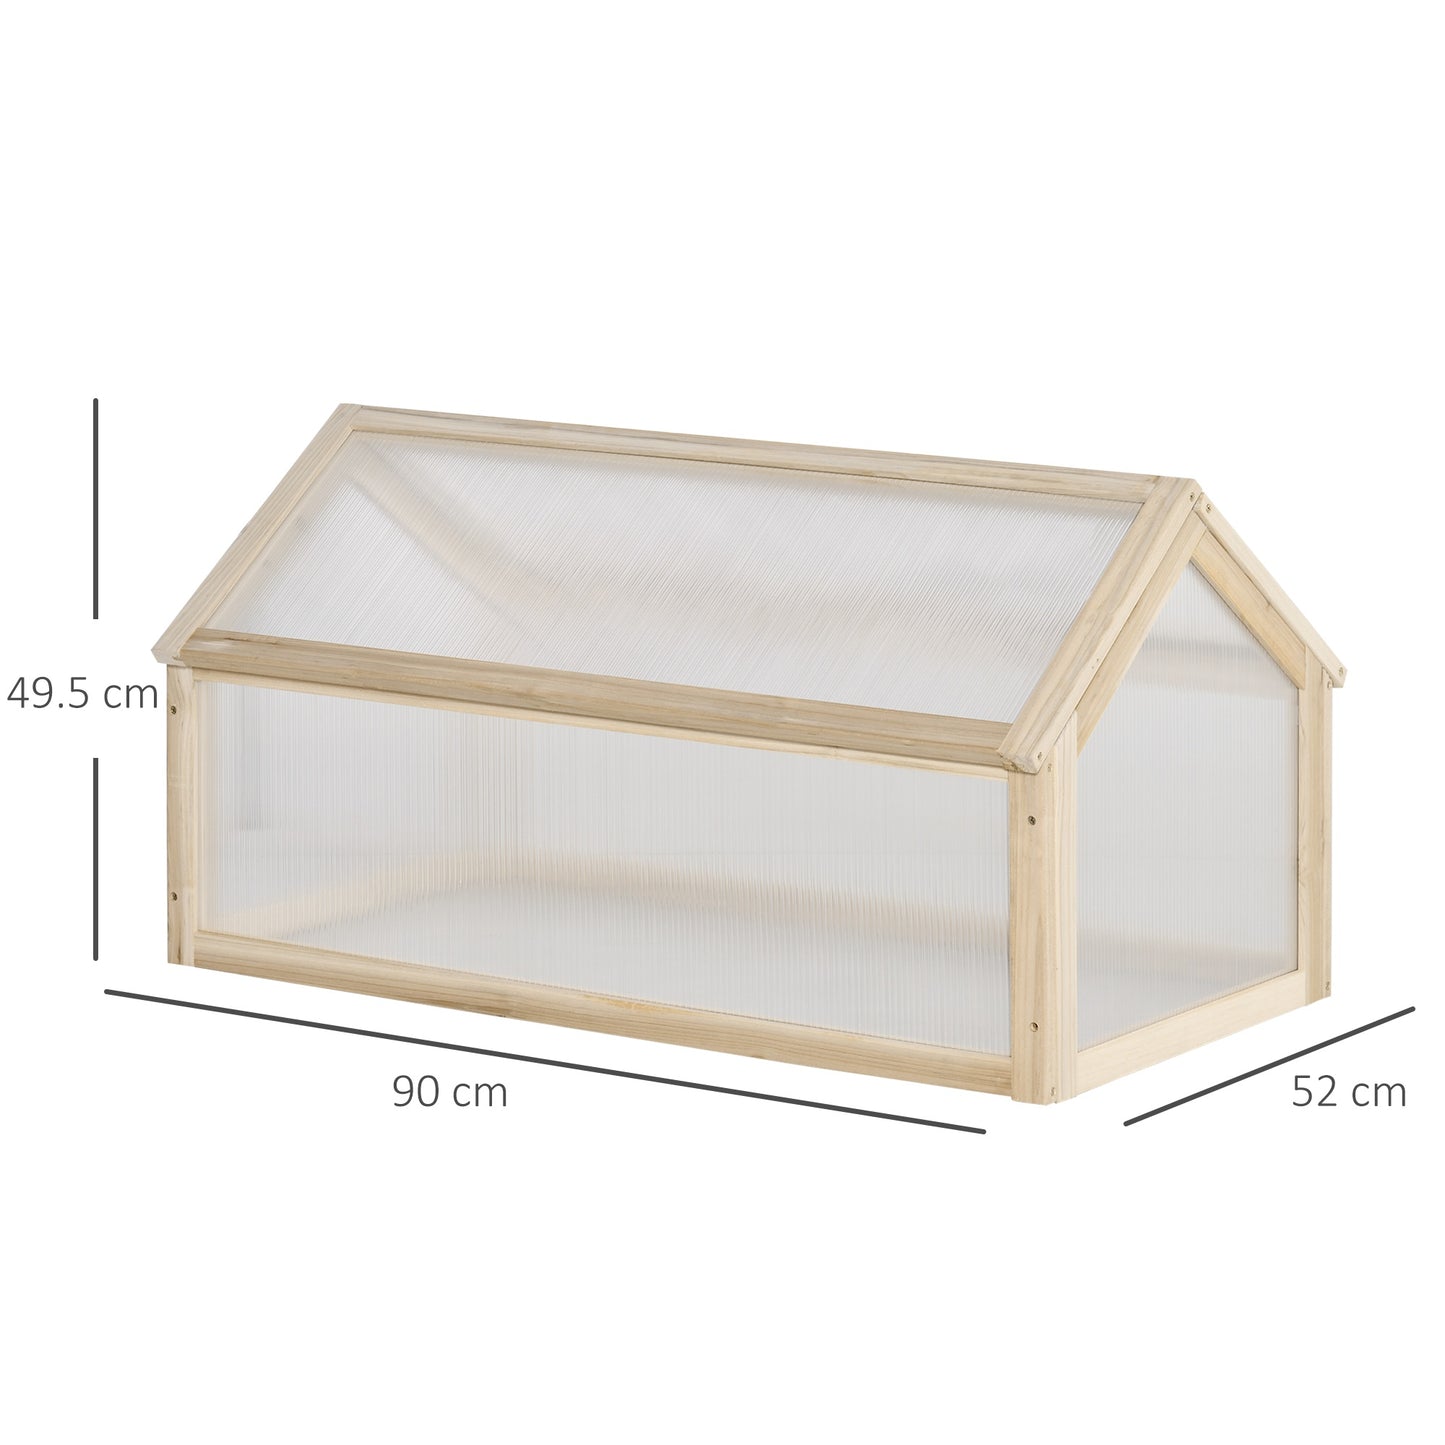 Outsunny Wooden Cold Frame Greenhouse Garden Polycarbonate Grow House with Openable Top for Flowers, Vegetables, Plants, 90 x 52 x 50cm, Natural